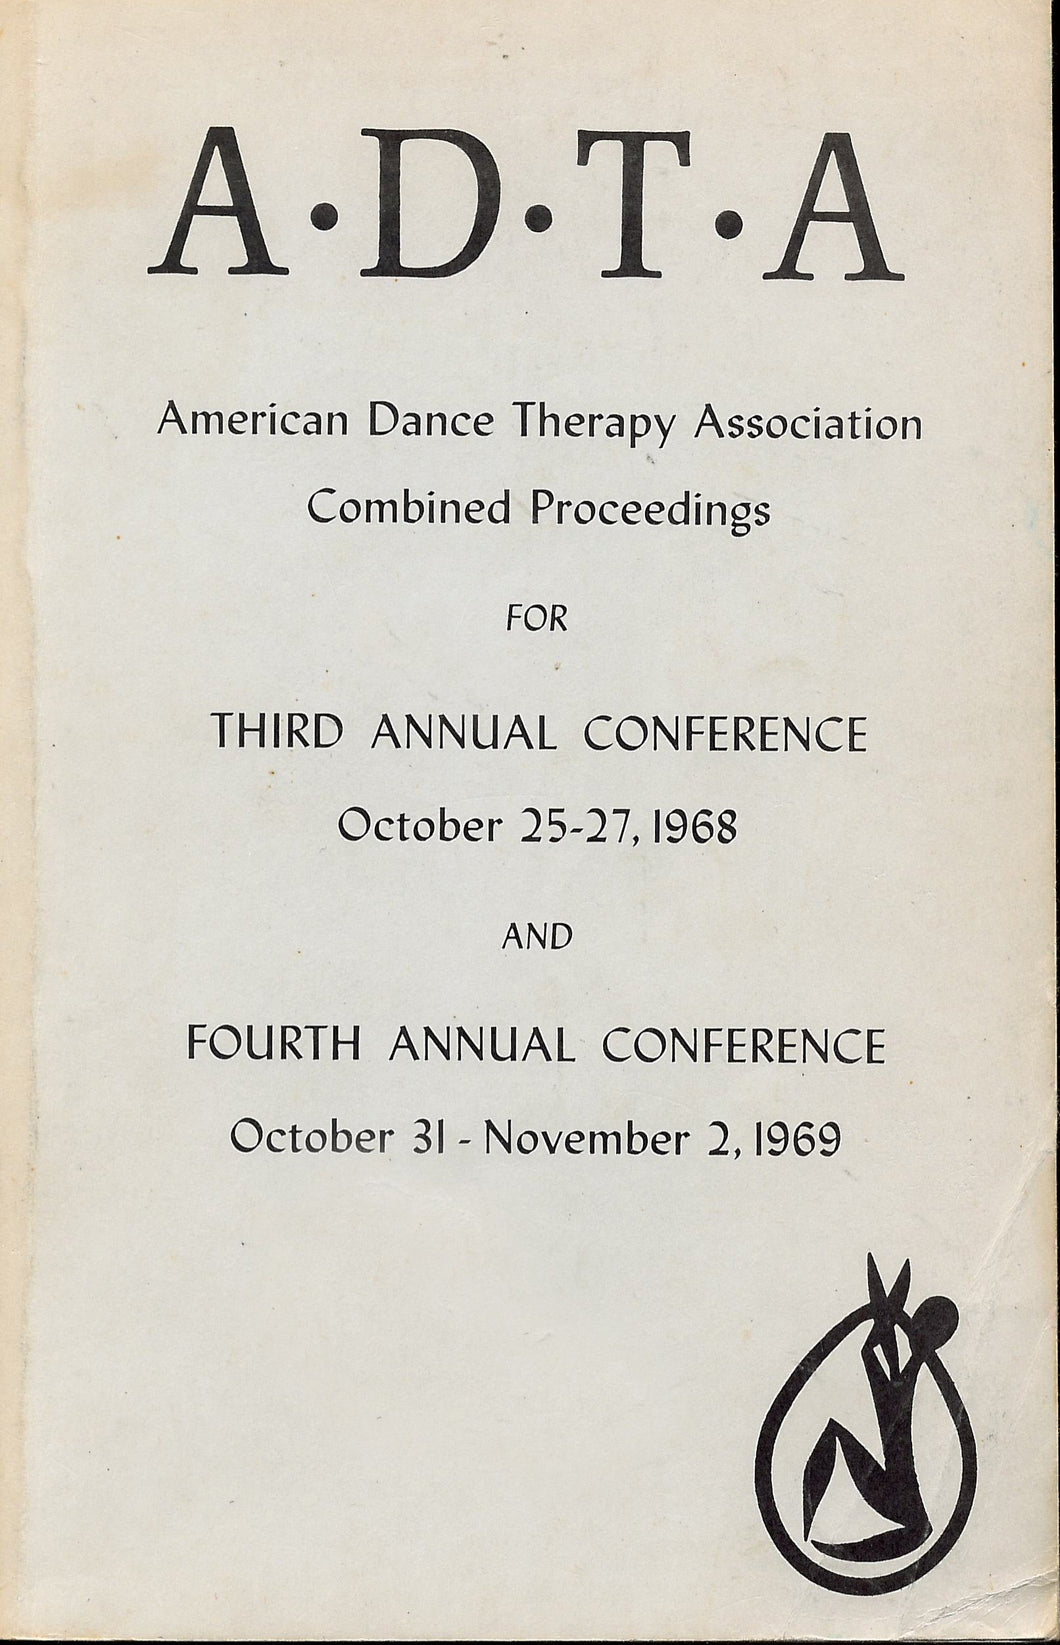 ADTA: American Dance Therapy Association Combined Proceedings for Third Annual Conference October 25-27, 1968 and Fourth Annual Conference October 31-November 2, 1969